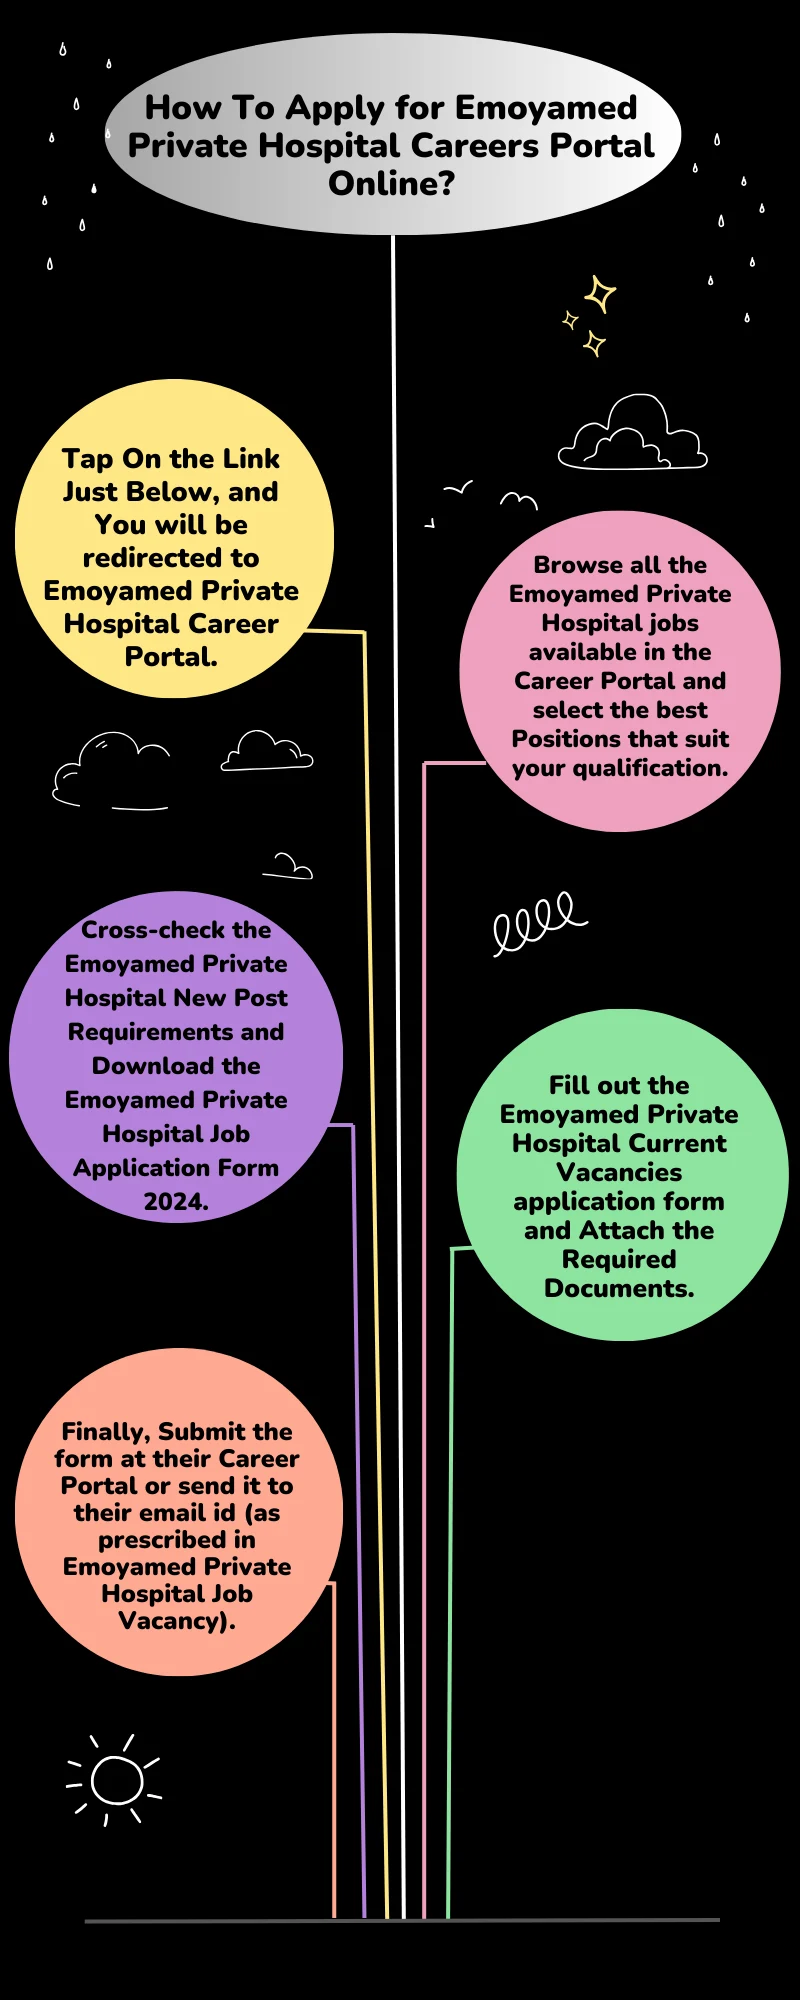 How To Apply for Emoyamed Private Hospital Careers Portal Online?